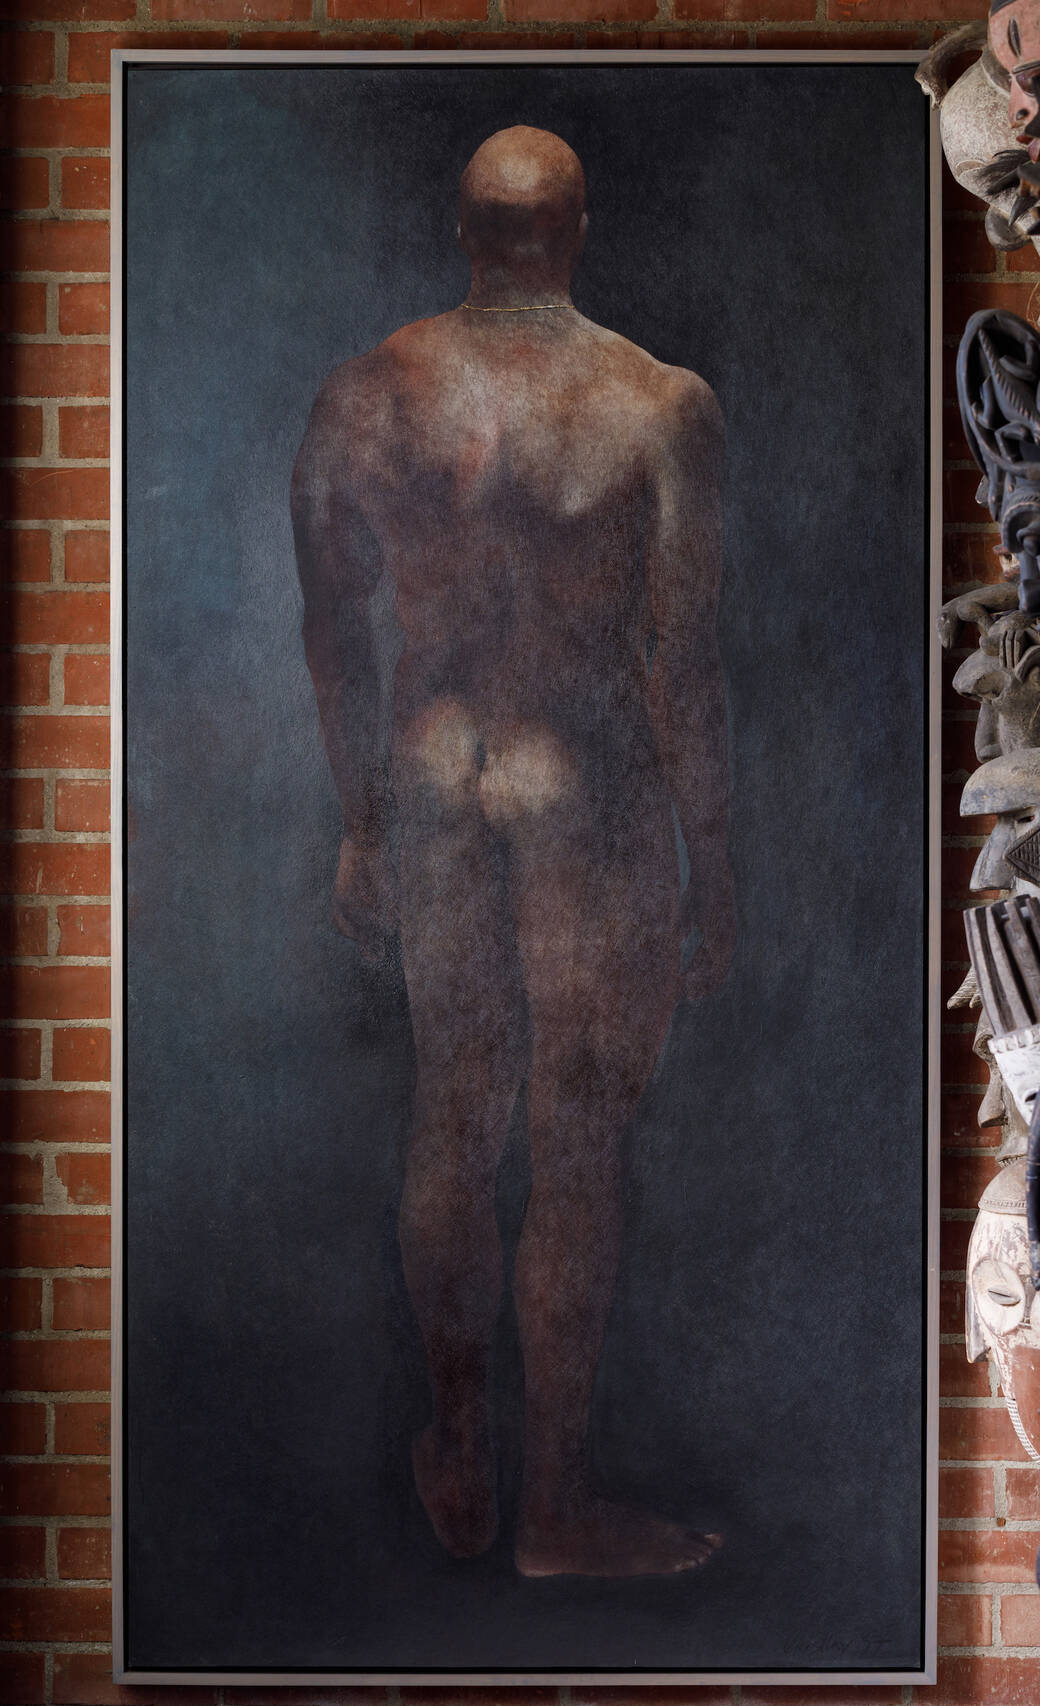 A large painting by Peter Liashkov of a rear view of a nude adult male of African ancestry, photographed against a brick wall and adjacent to masks hanging from a wall, which are partially obscured